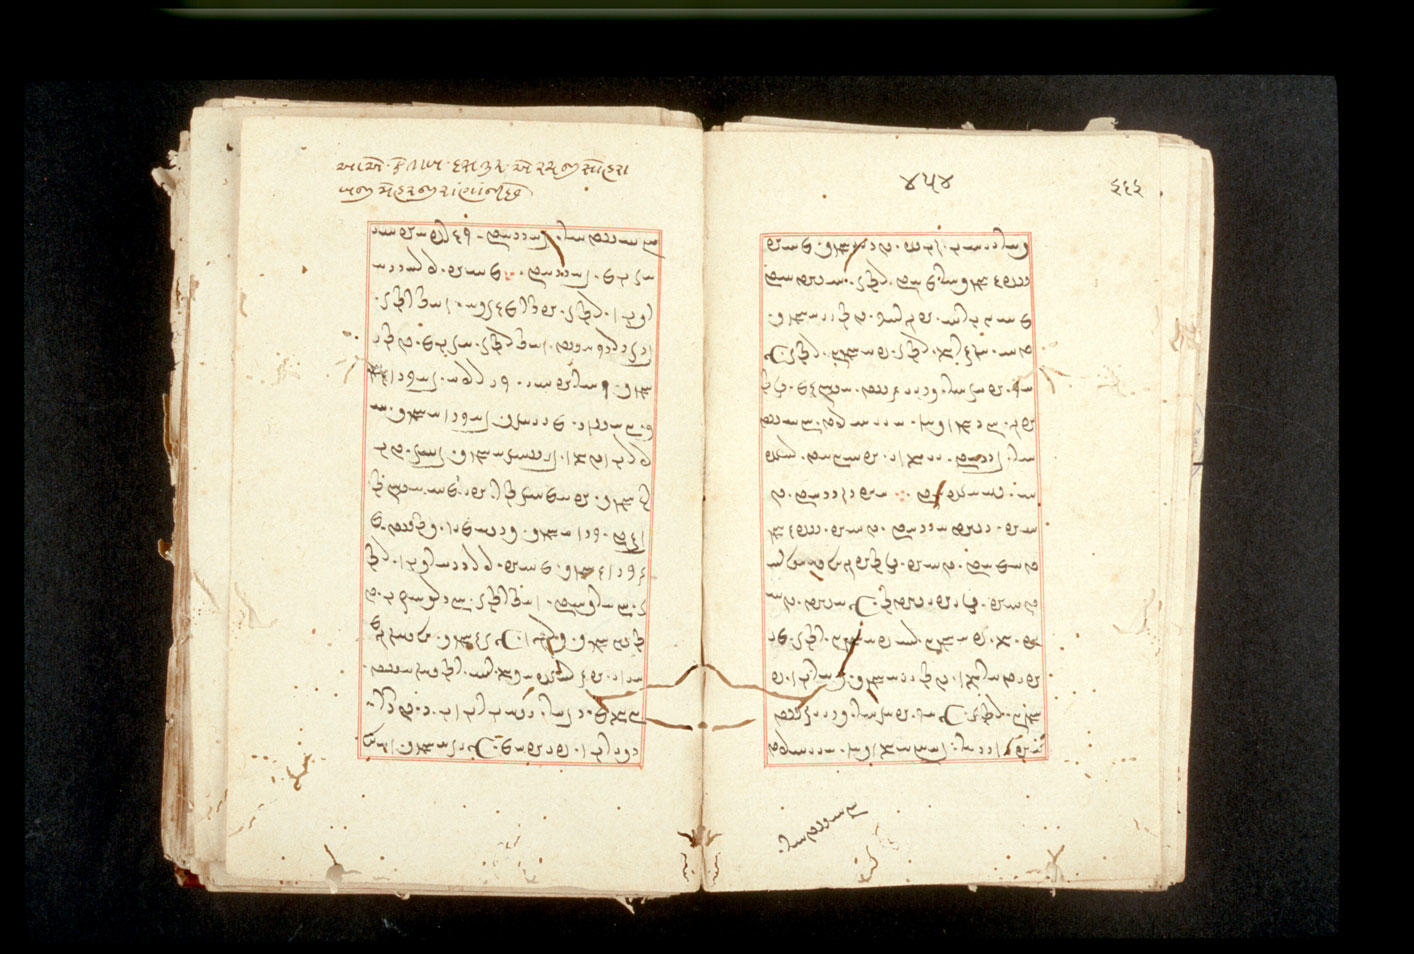 Folios 454v (right) and 455r (left)